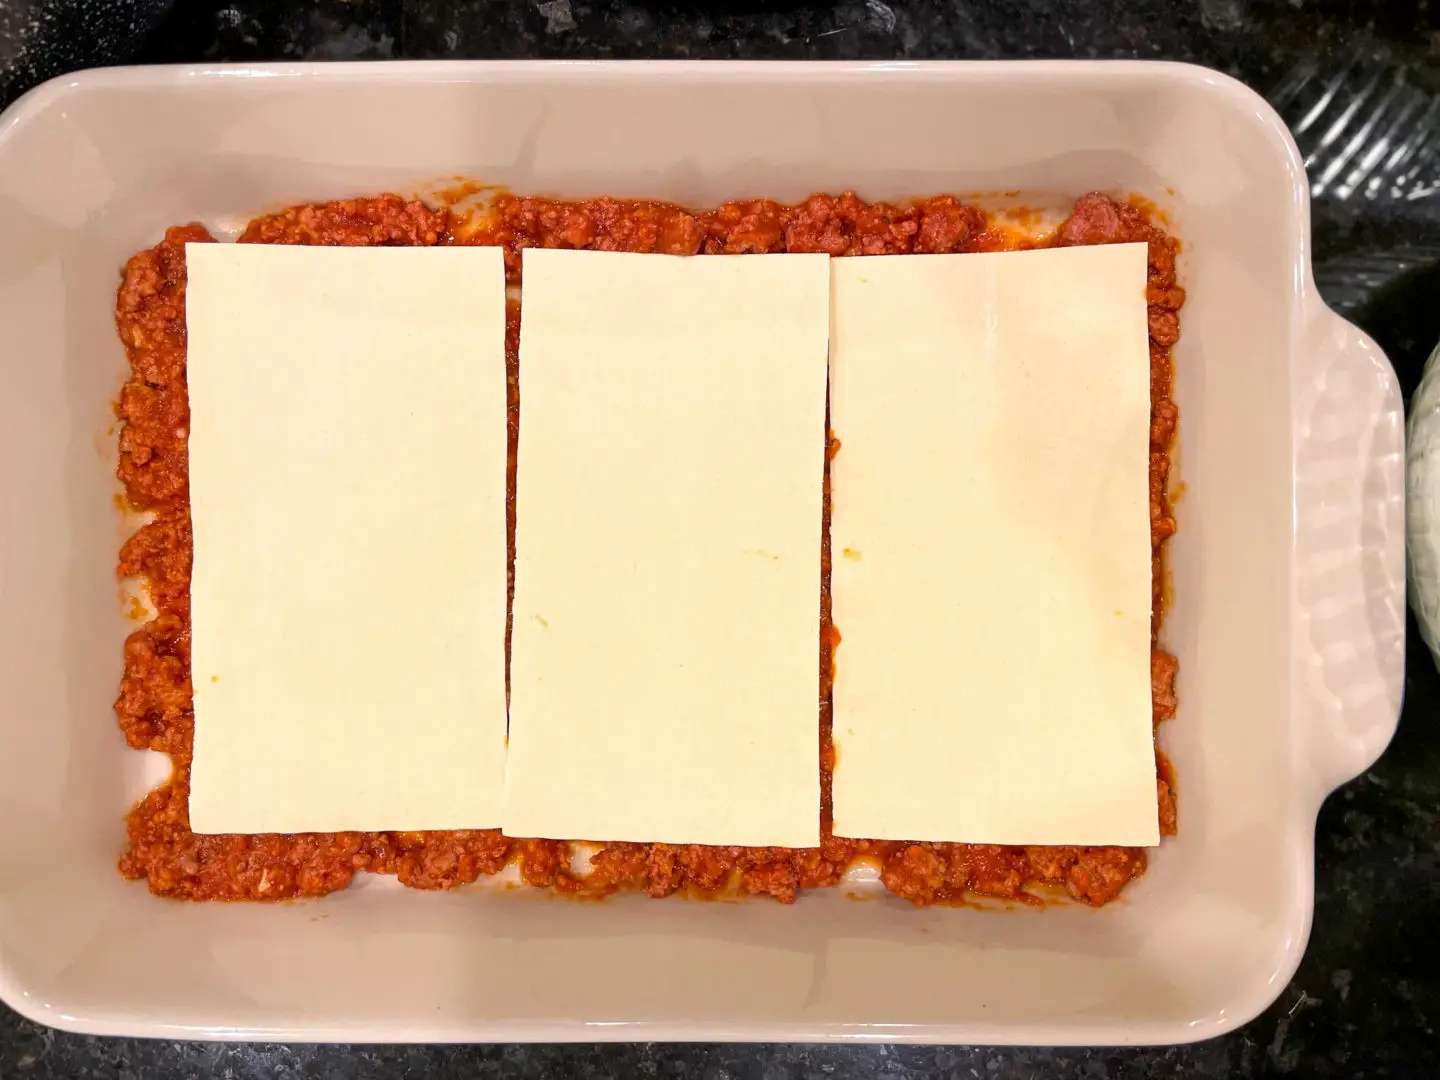 Lay out oven ready lasagne sheets.